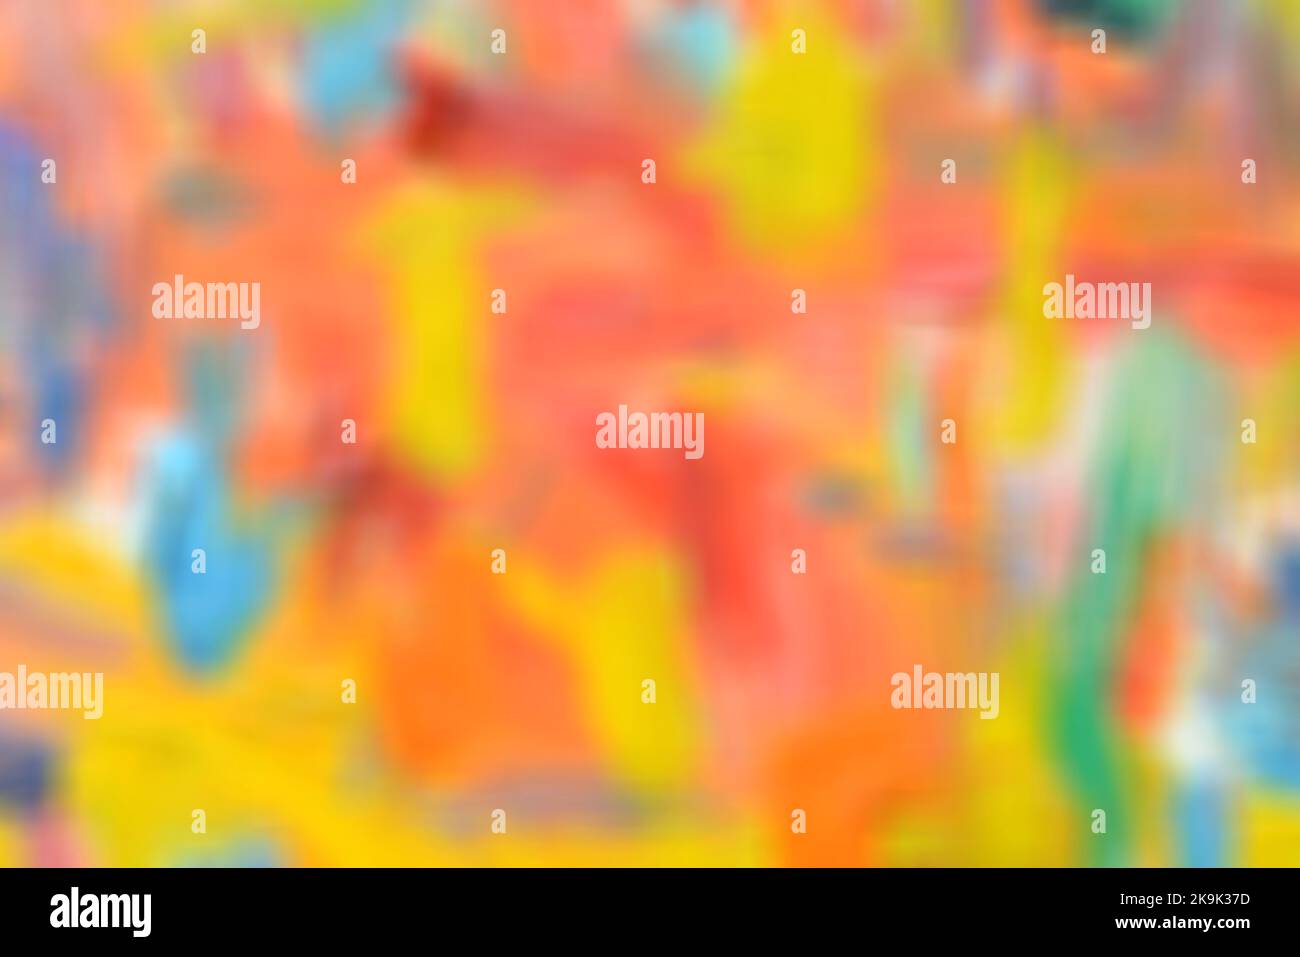 Colors of happiness, fun, bright, cheerful, exhilarating. Abstract blurred vivid colorful background. Stock Photo